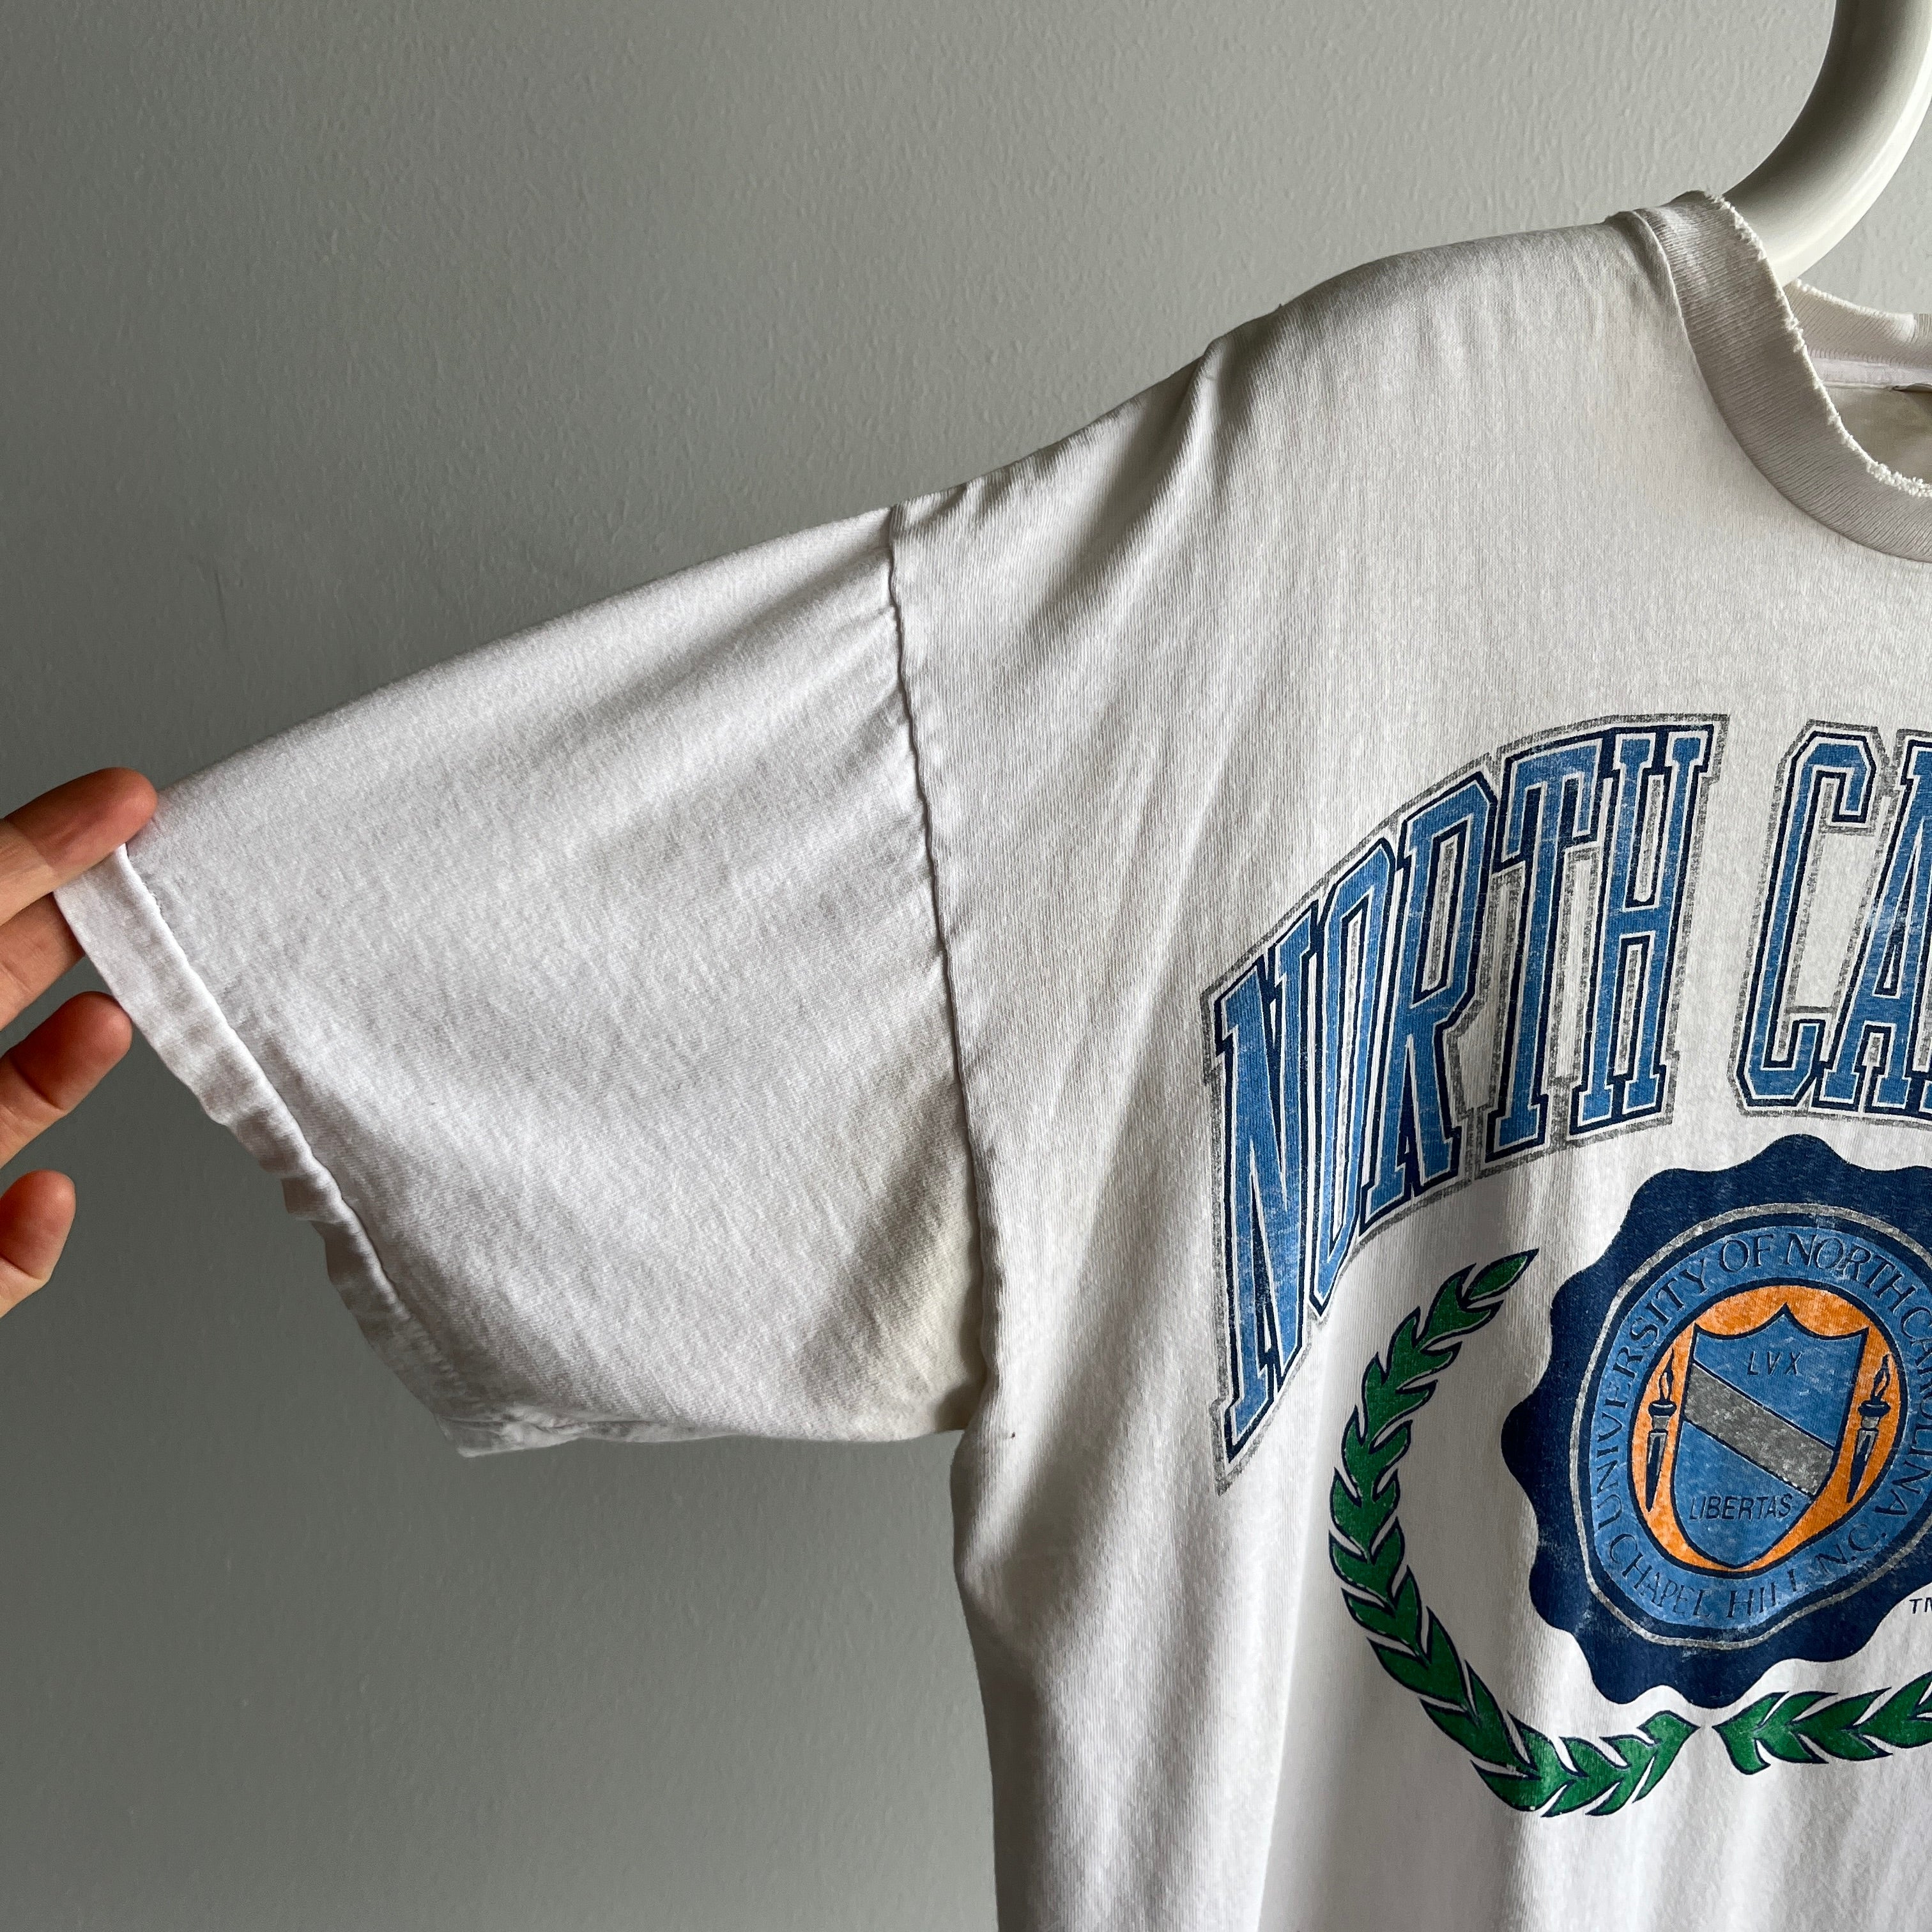 1980/90s Tattered, Torn, Worn, Washed with Dark Colors, North Carolina T-Shirt